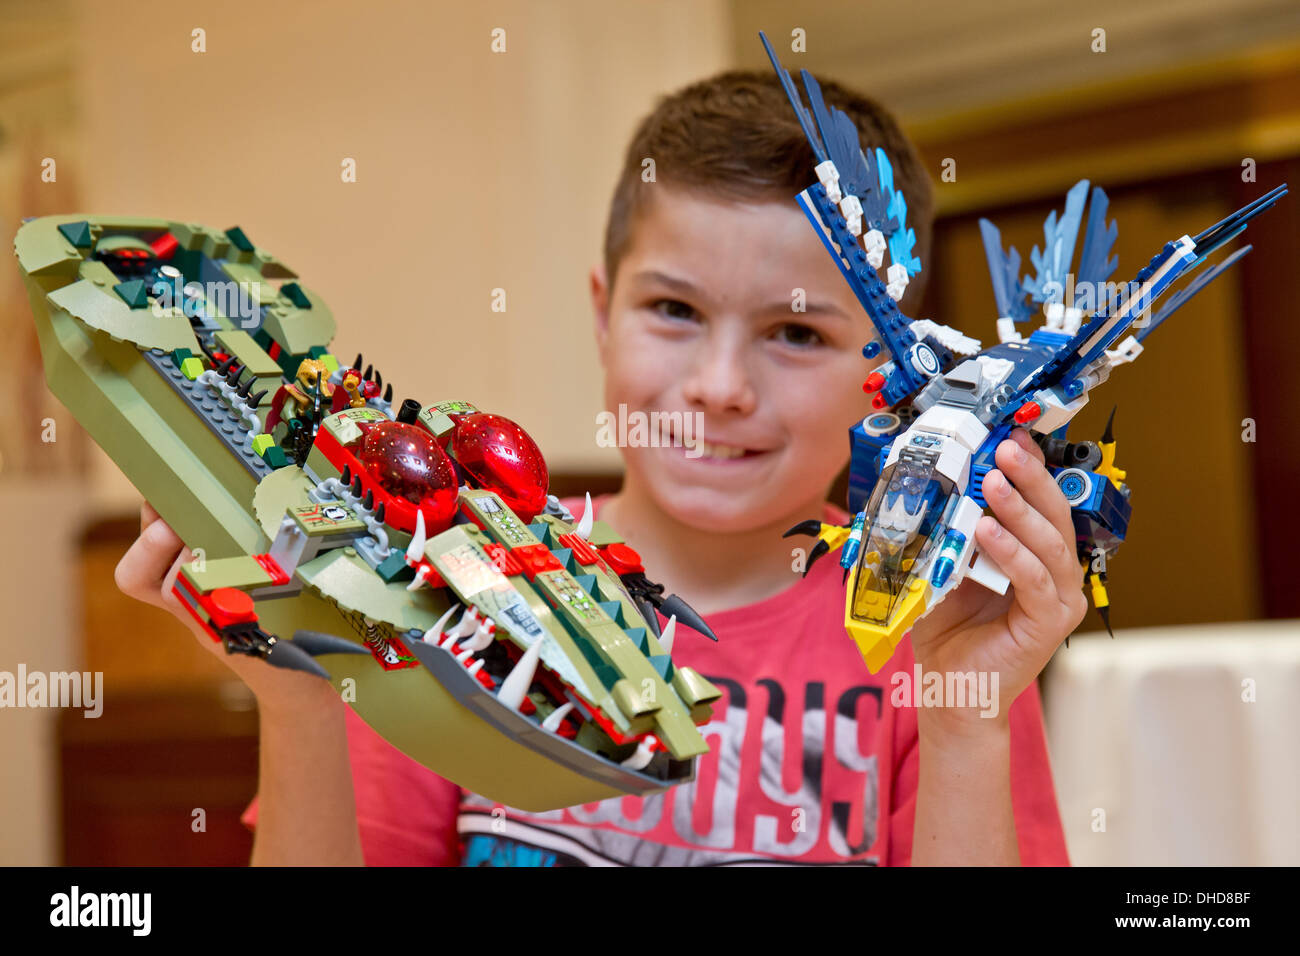 Nuremberg, Germany. 07th Nov, 2013. Max holds parts of the 'Legends of Chima' by LEGO at the annual press conference of the German federation of toys retail business in Nuremberg, Germany, 07 November 2013. The toy is part of the 'Top 10 Toys 2013' list published by the federation. Photo: DANIEL REINHARDT/dpa/Alamy Live News Stock Photo